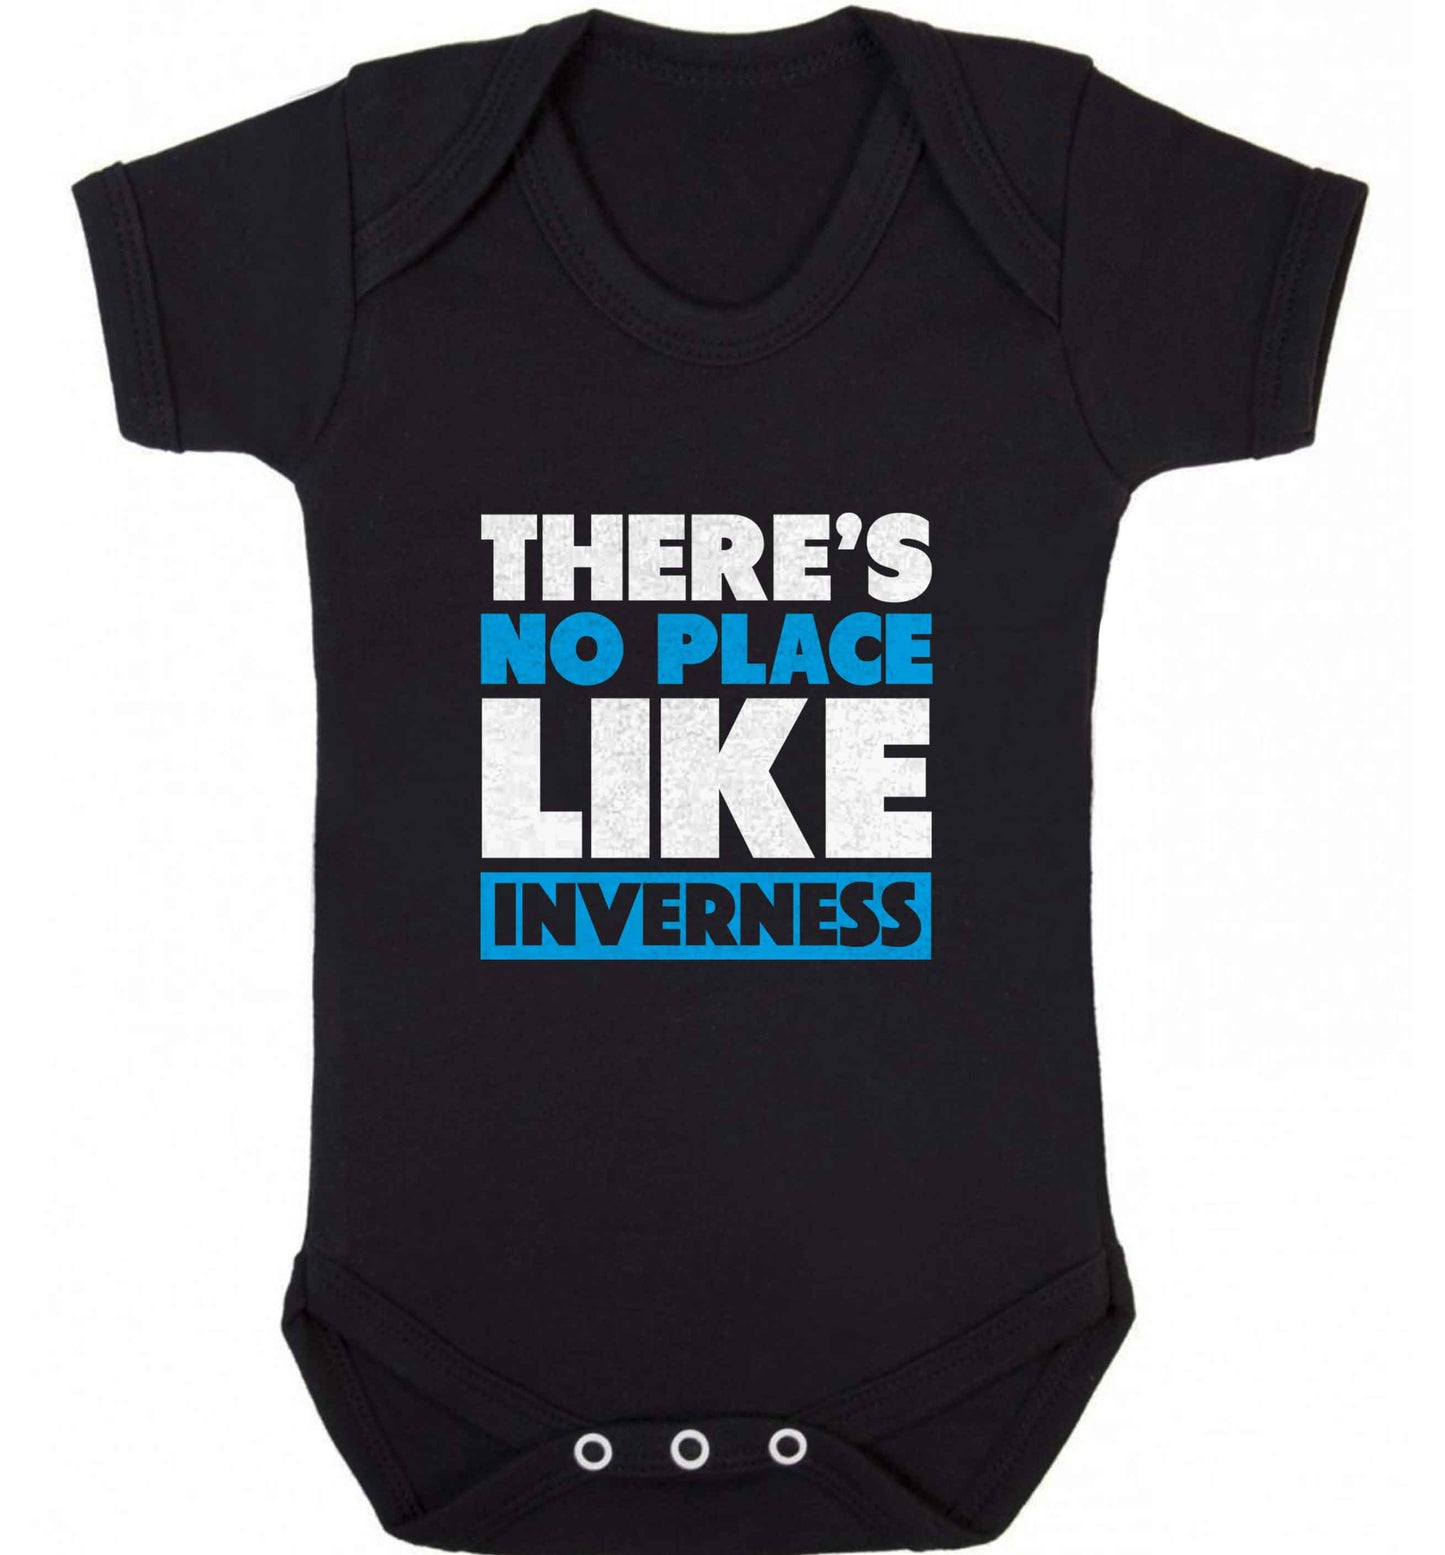 There's no place like Inverness baby vest black 18-24 months